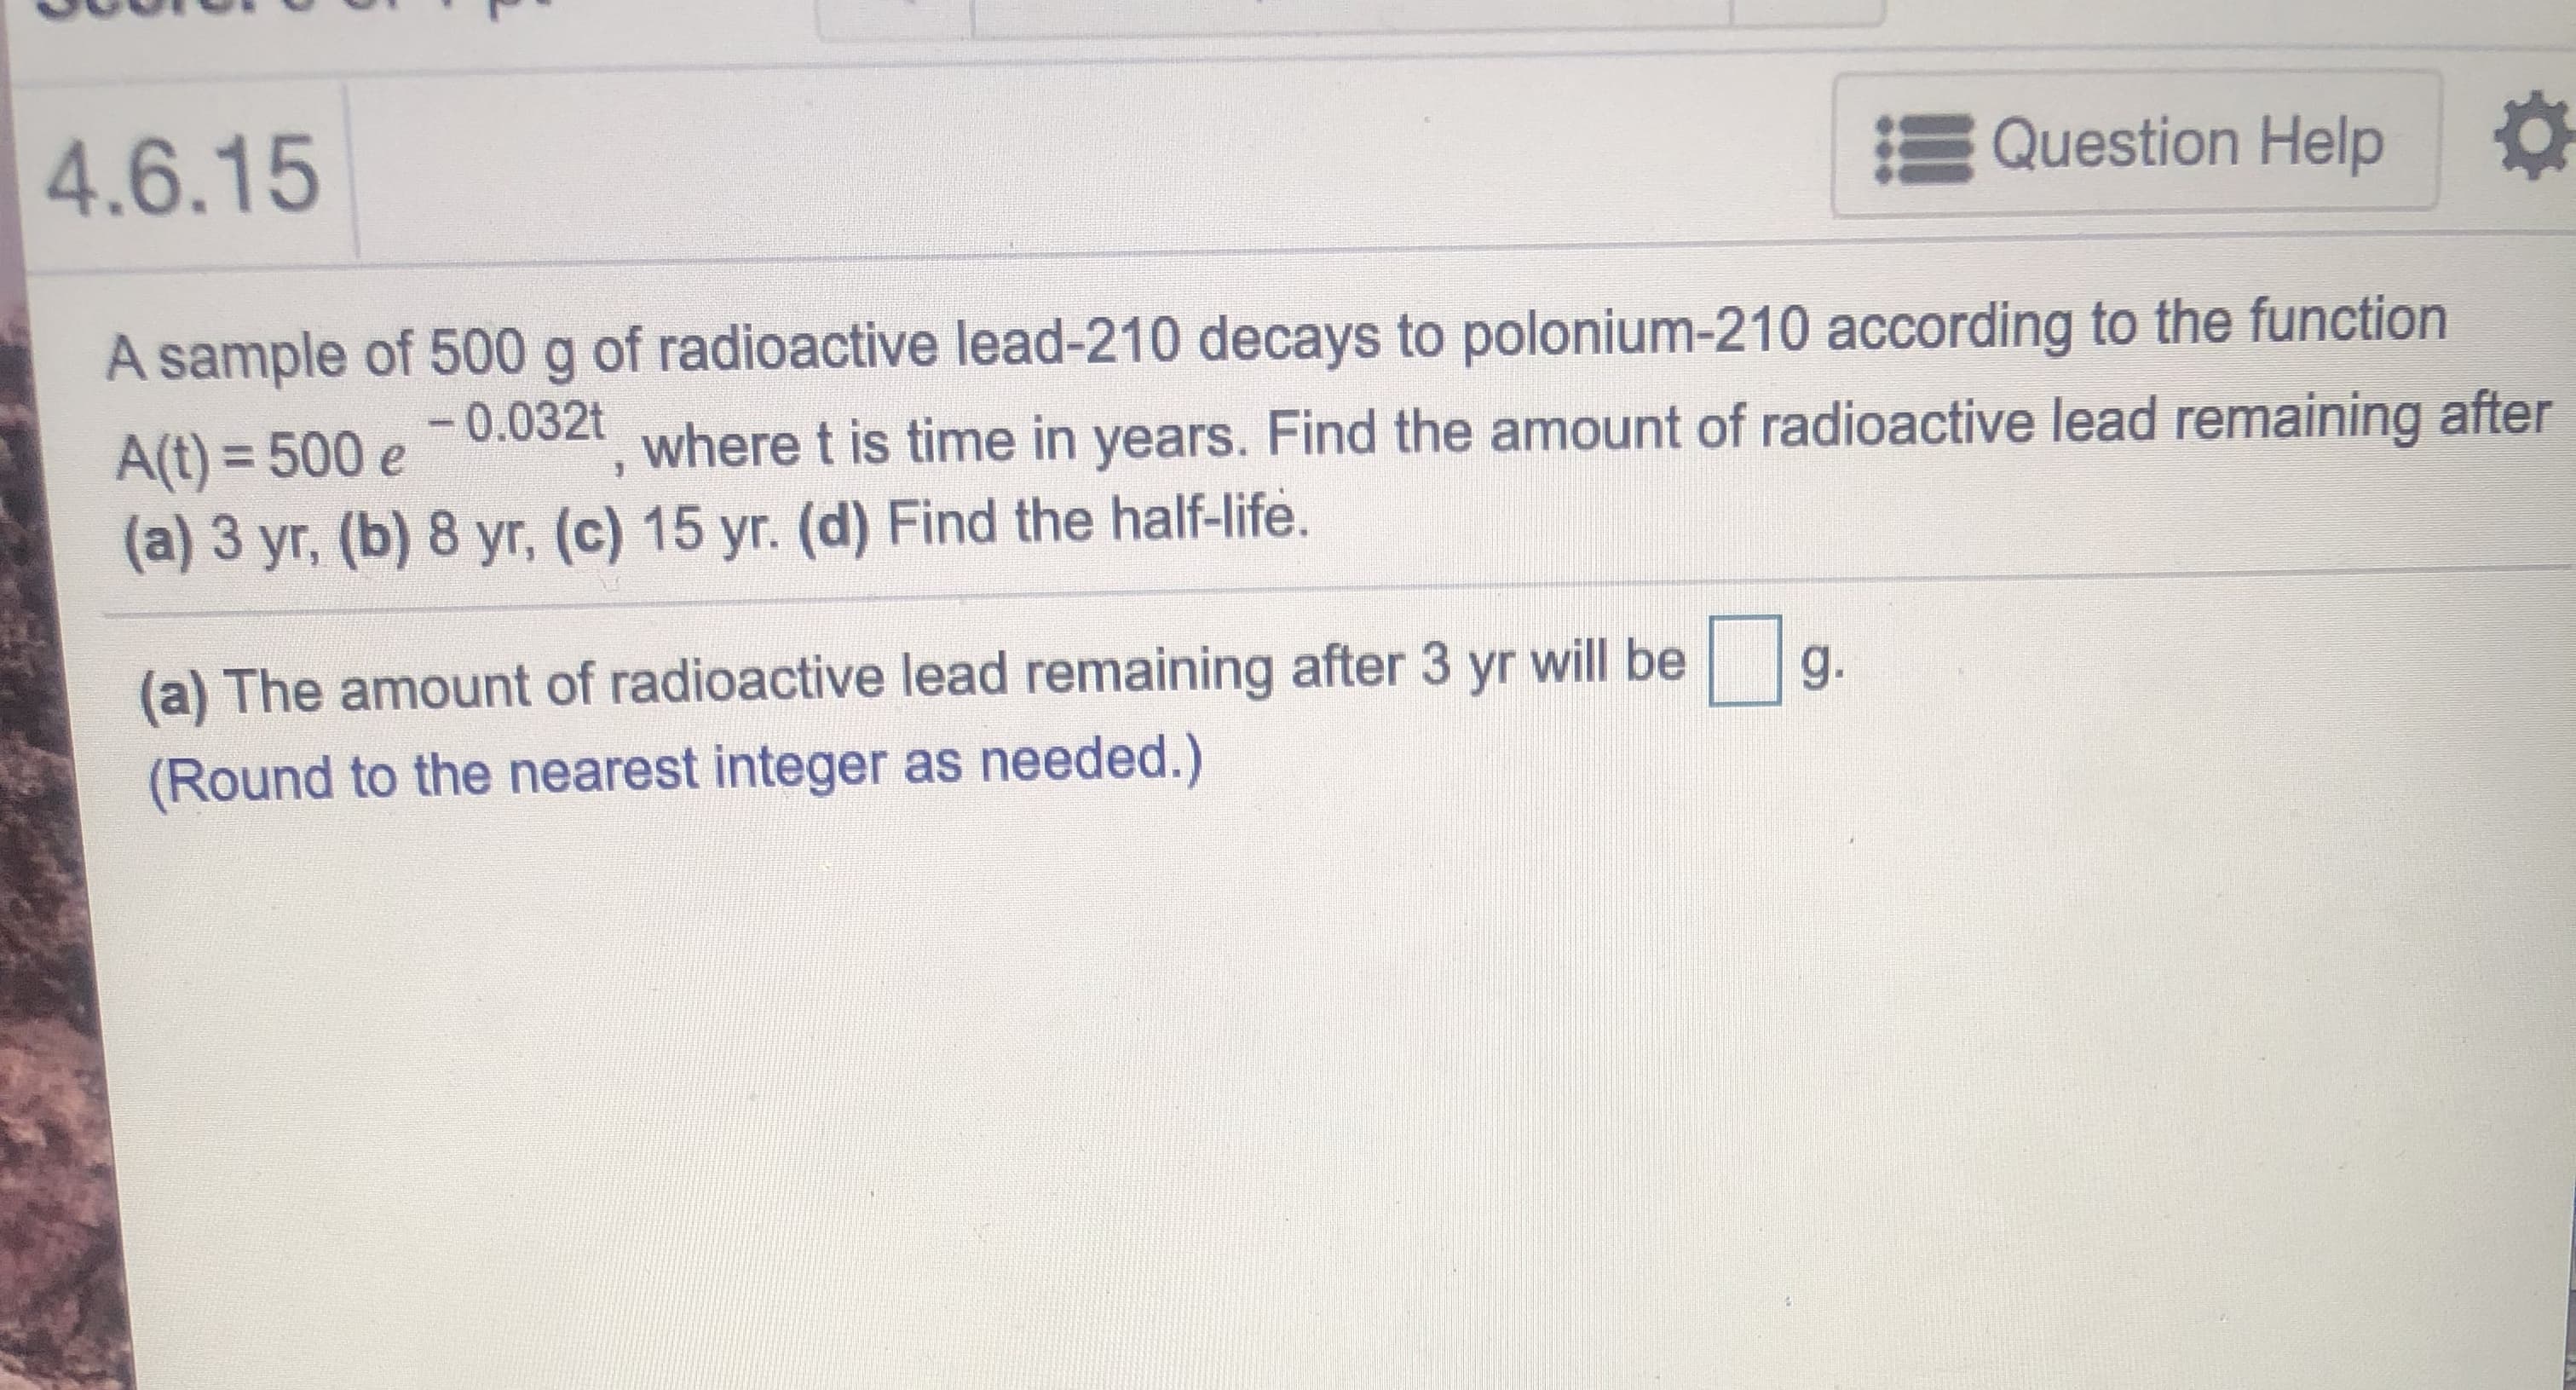 A sample of 500 g of radioactive lead-210 decays to polonium-210 according to the function
-0.032t
A(t) = 500 e
(a) 3 yr, (b) 8 yr, (c) 15 yr. (d) Find the half-life.
where t is time in years. Find the amount of radioactive lead remaining after
(a) The amount of radioactive lead remaining after 3 yr will be
g.
(Round to the nearest integer as needed.)
